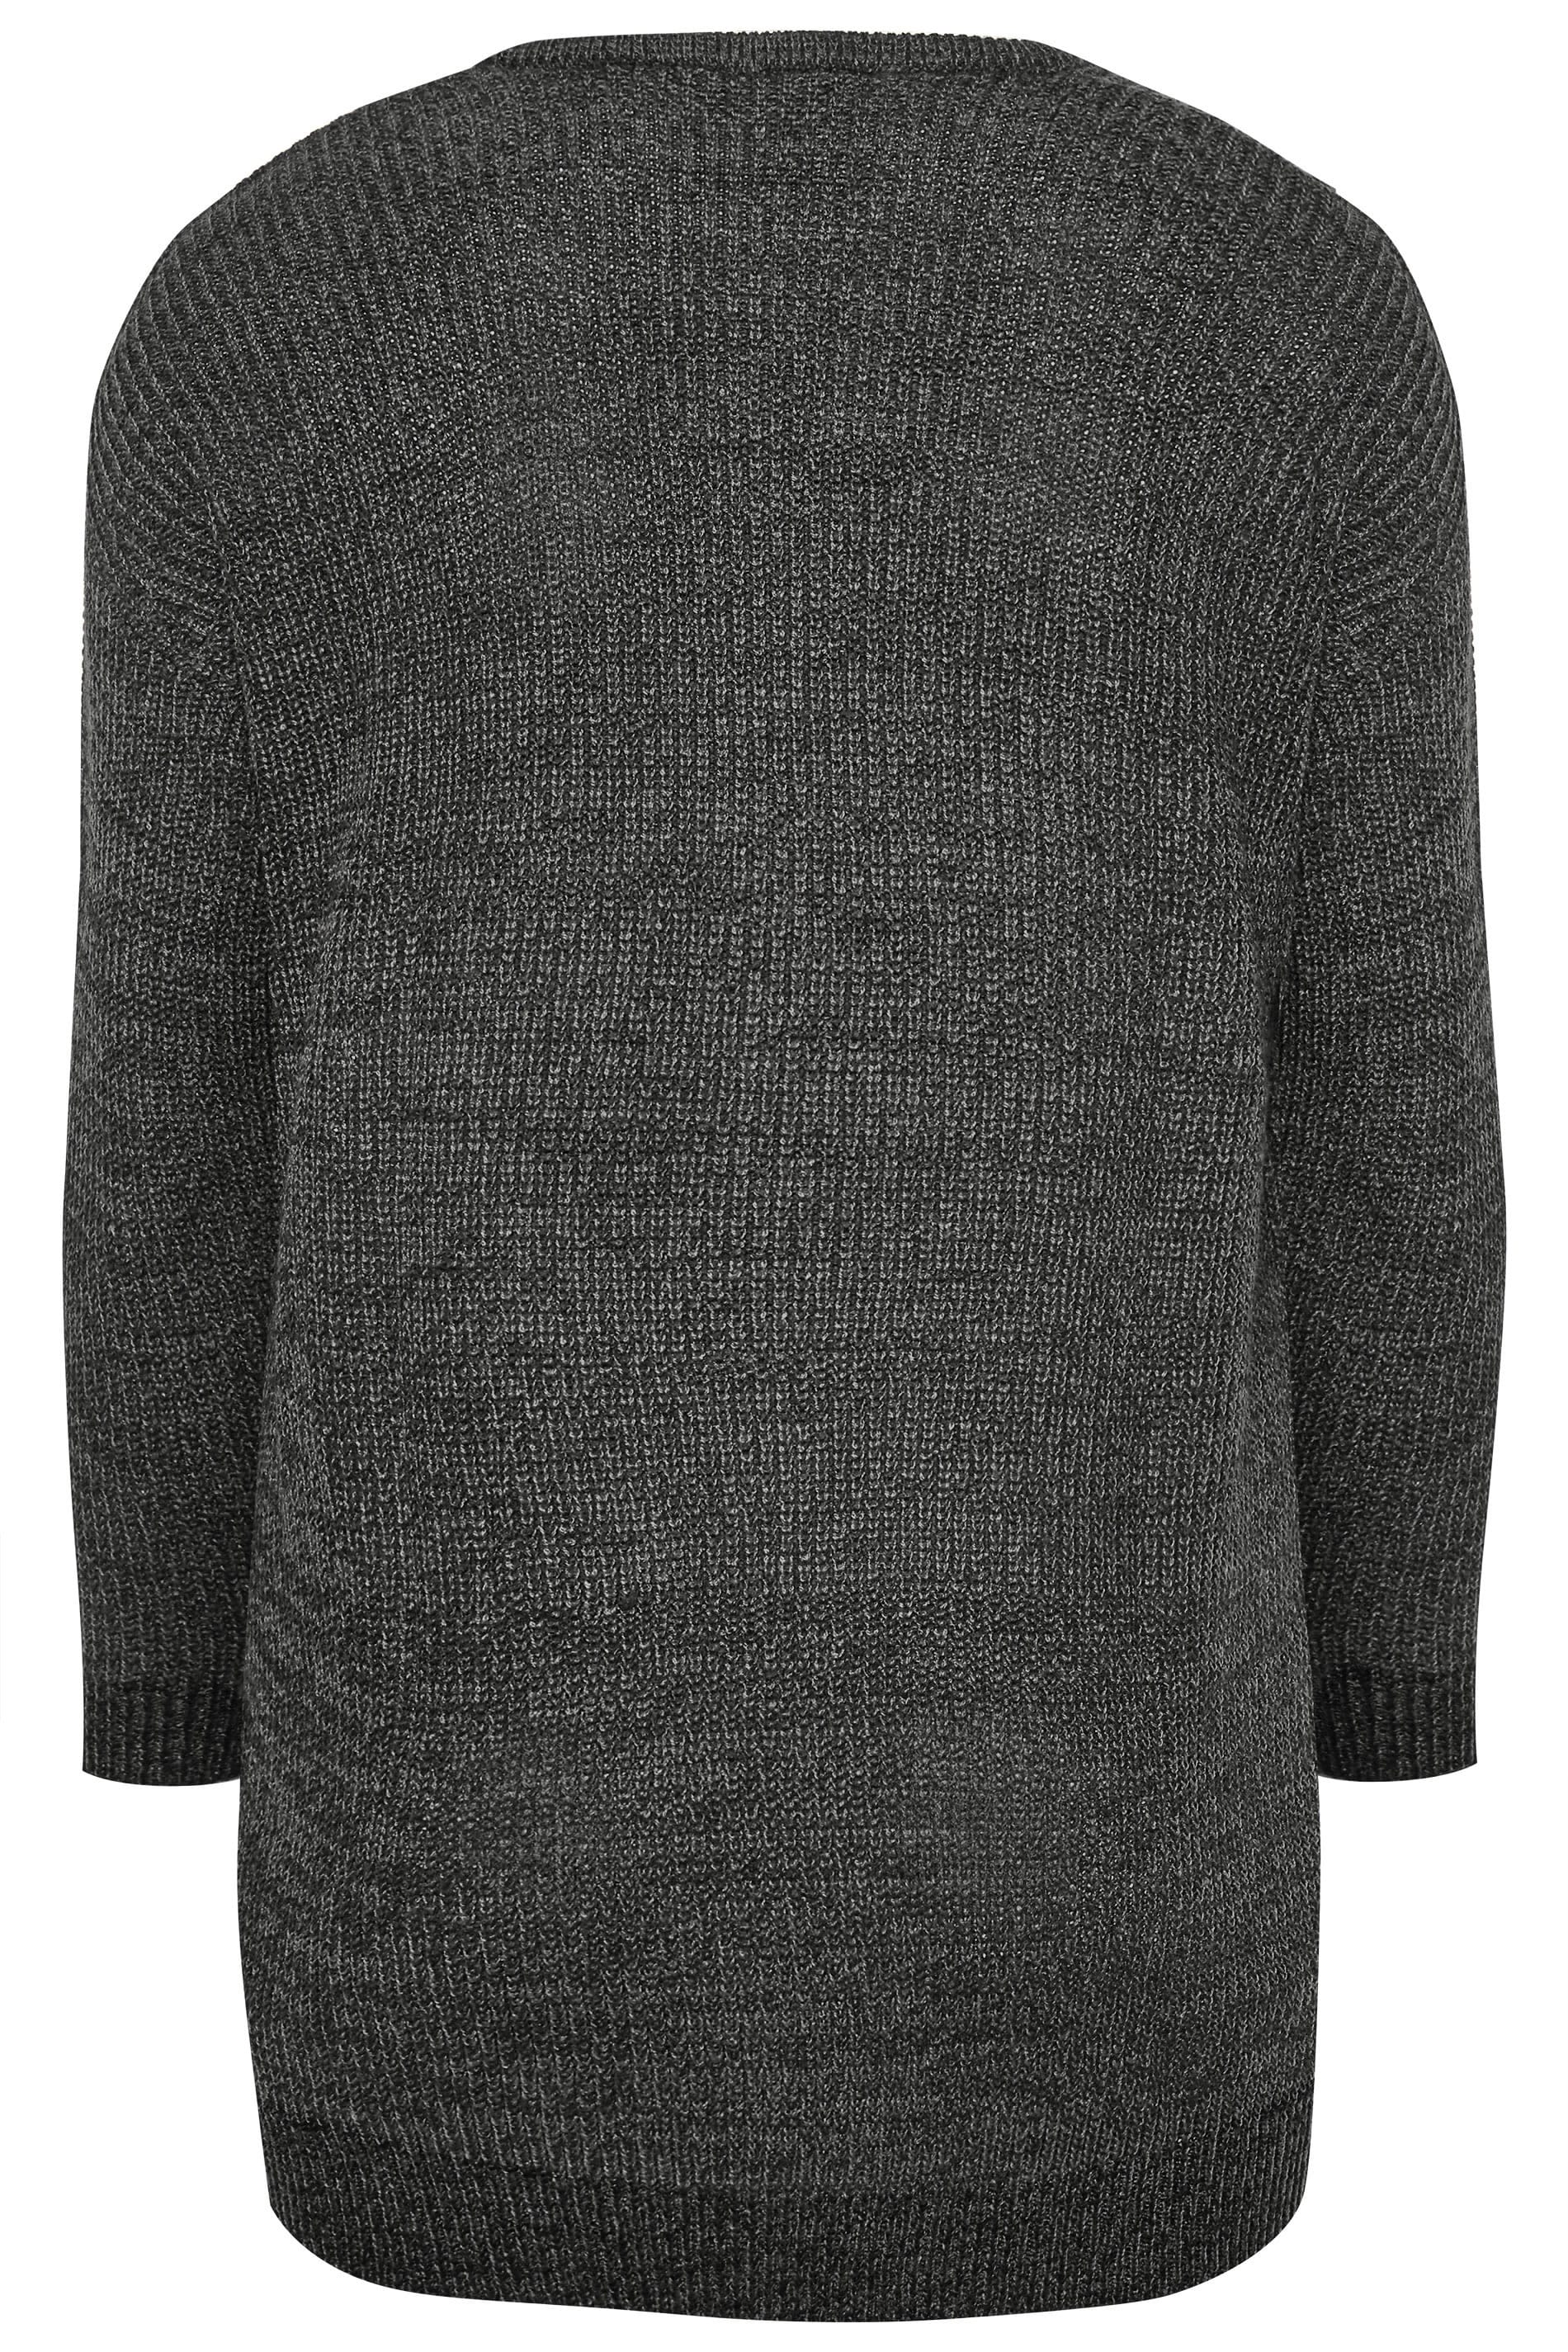 Charcoal Grey Marl Chunky Knitted Jumper | Yours Clothing